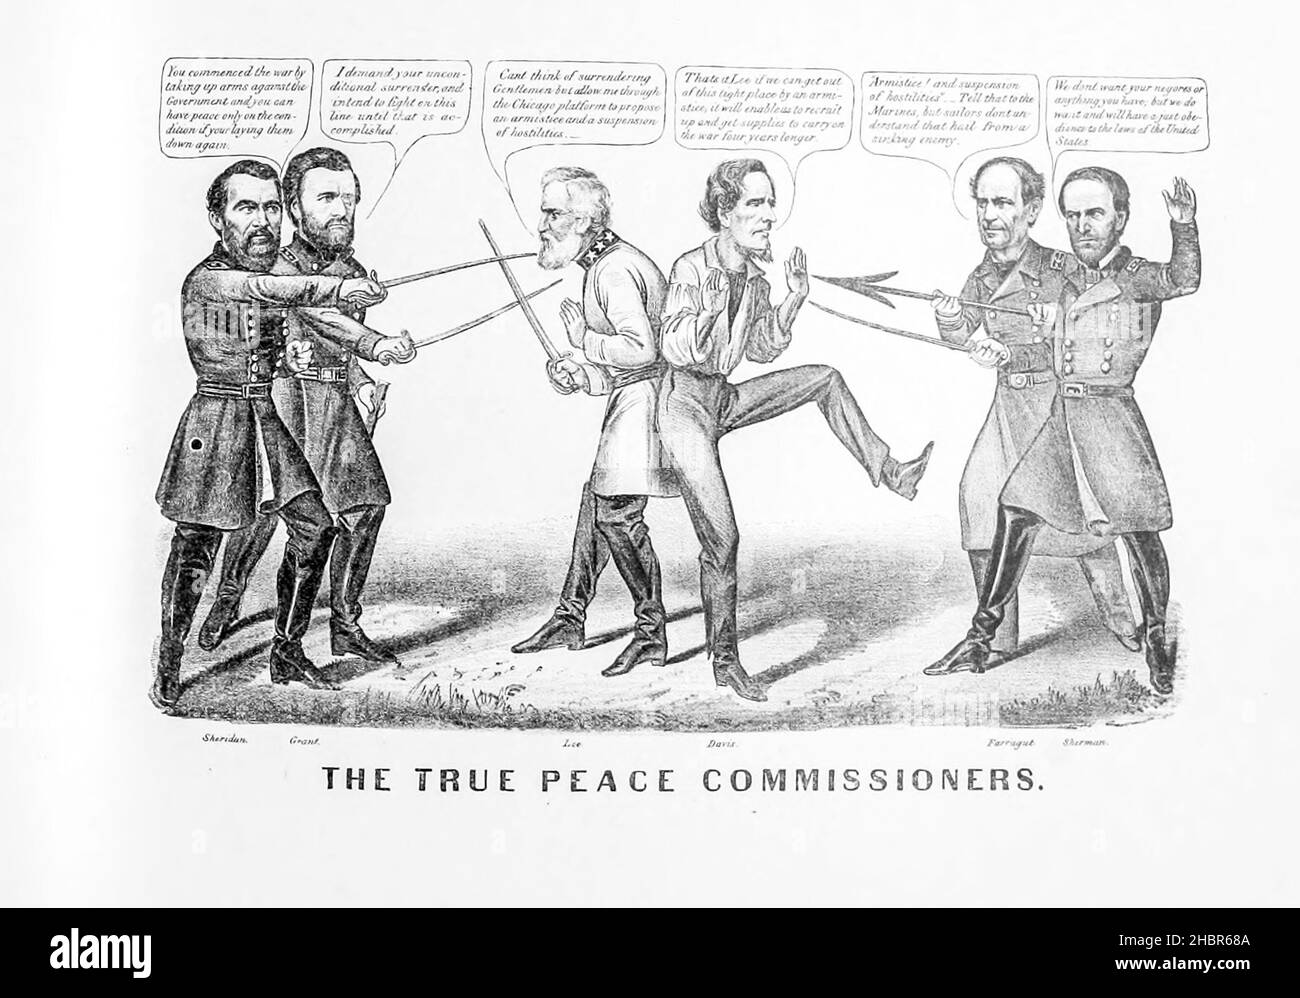 The True Peace Commissioners from a collection of Caricatures pertaining to the Civil War published in 1892 on Heavy Plate Paper Stock Photo